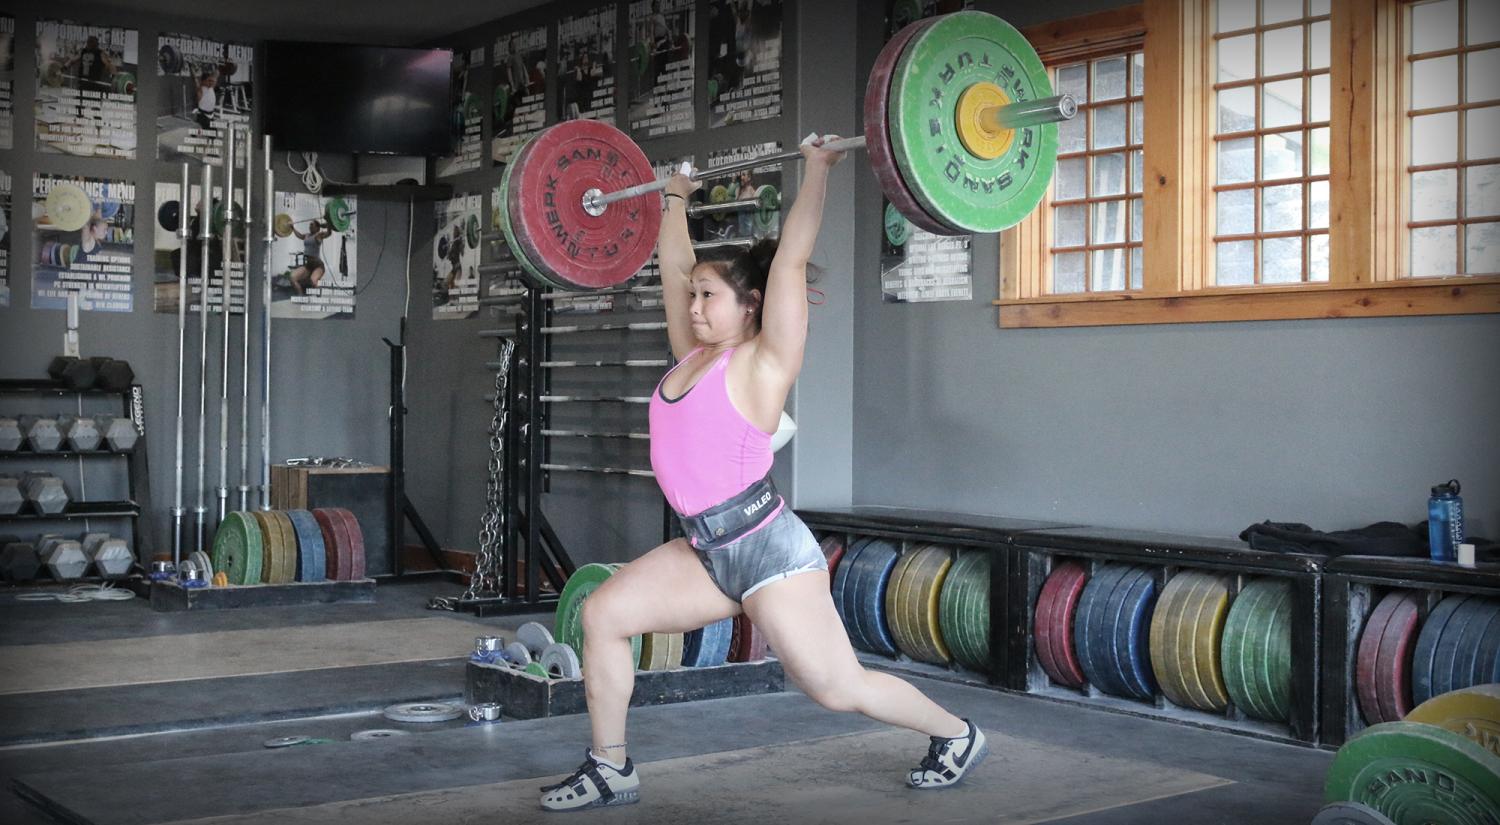 Learn The Olympic Lifts - Jerk